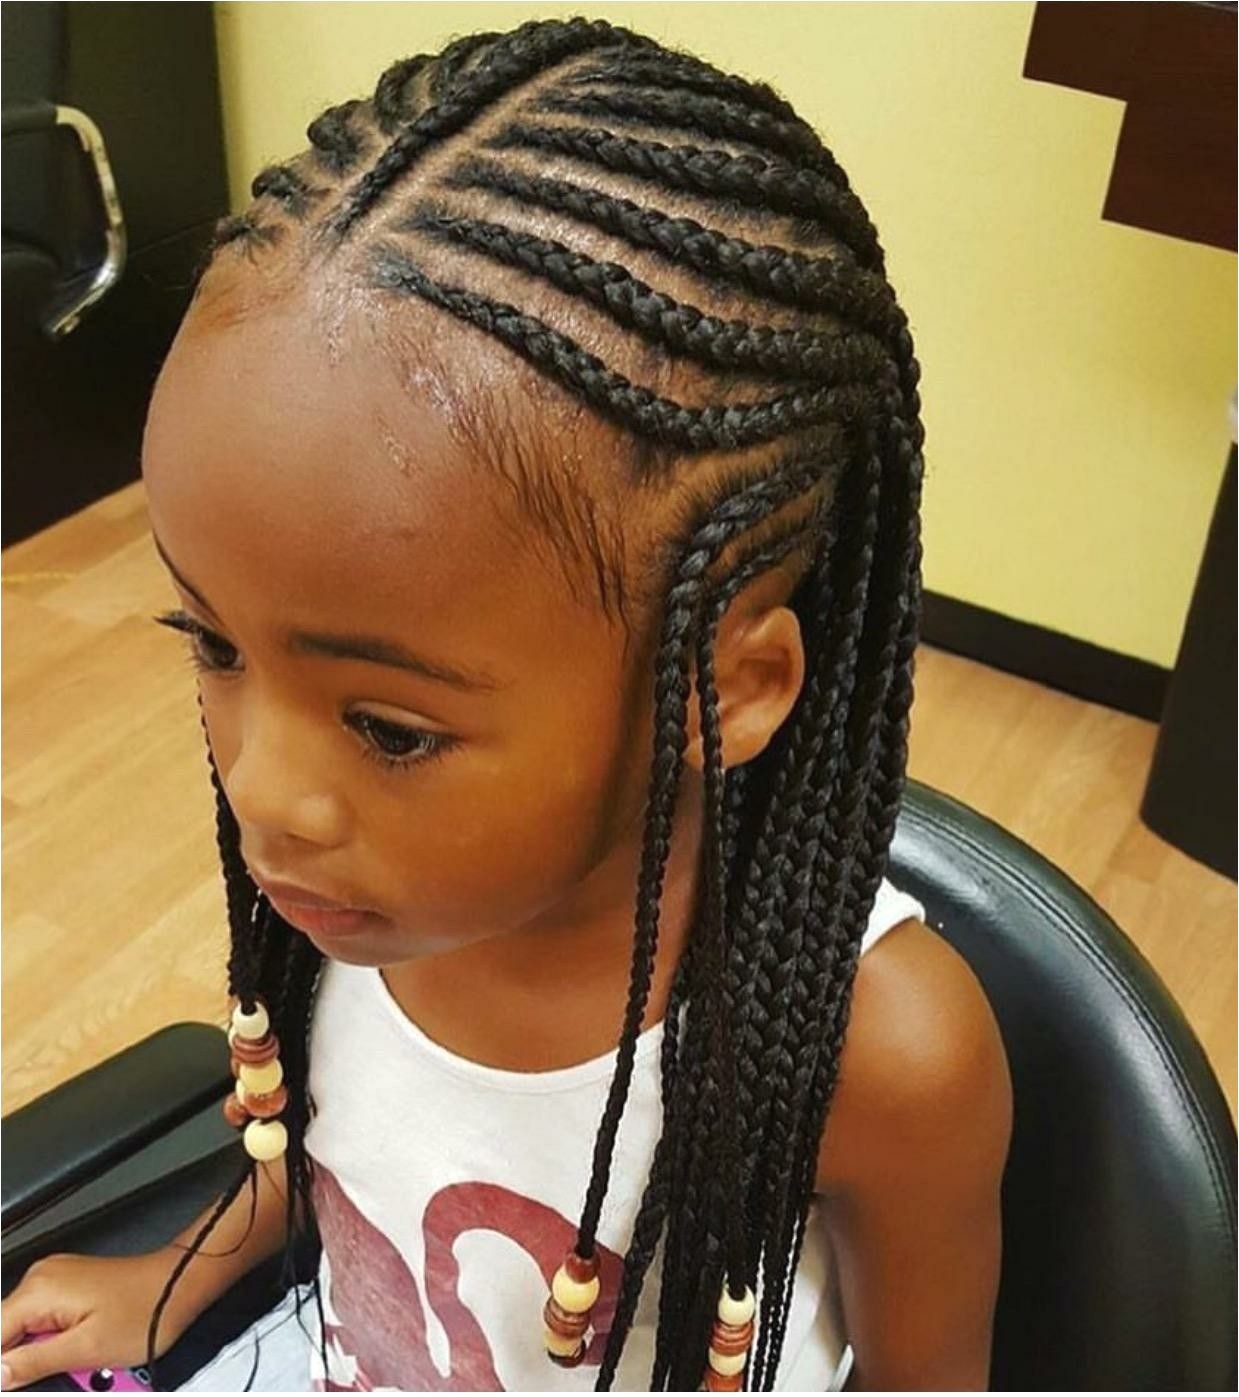 OFFICIAL LEE OFFICIAL LEE Hairstyles for GG & Nayeli in 2018 Pinterest from hairstyles for 6 year old black girl